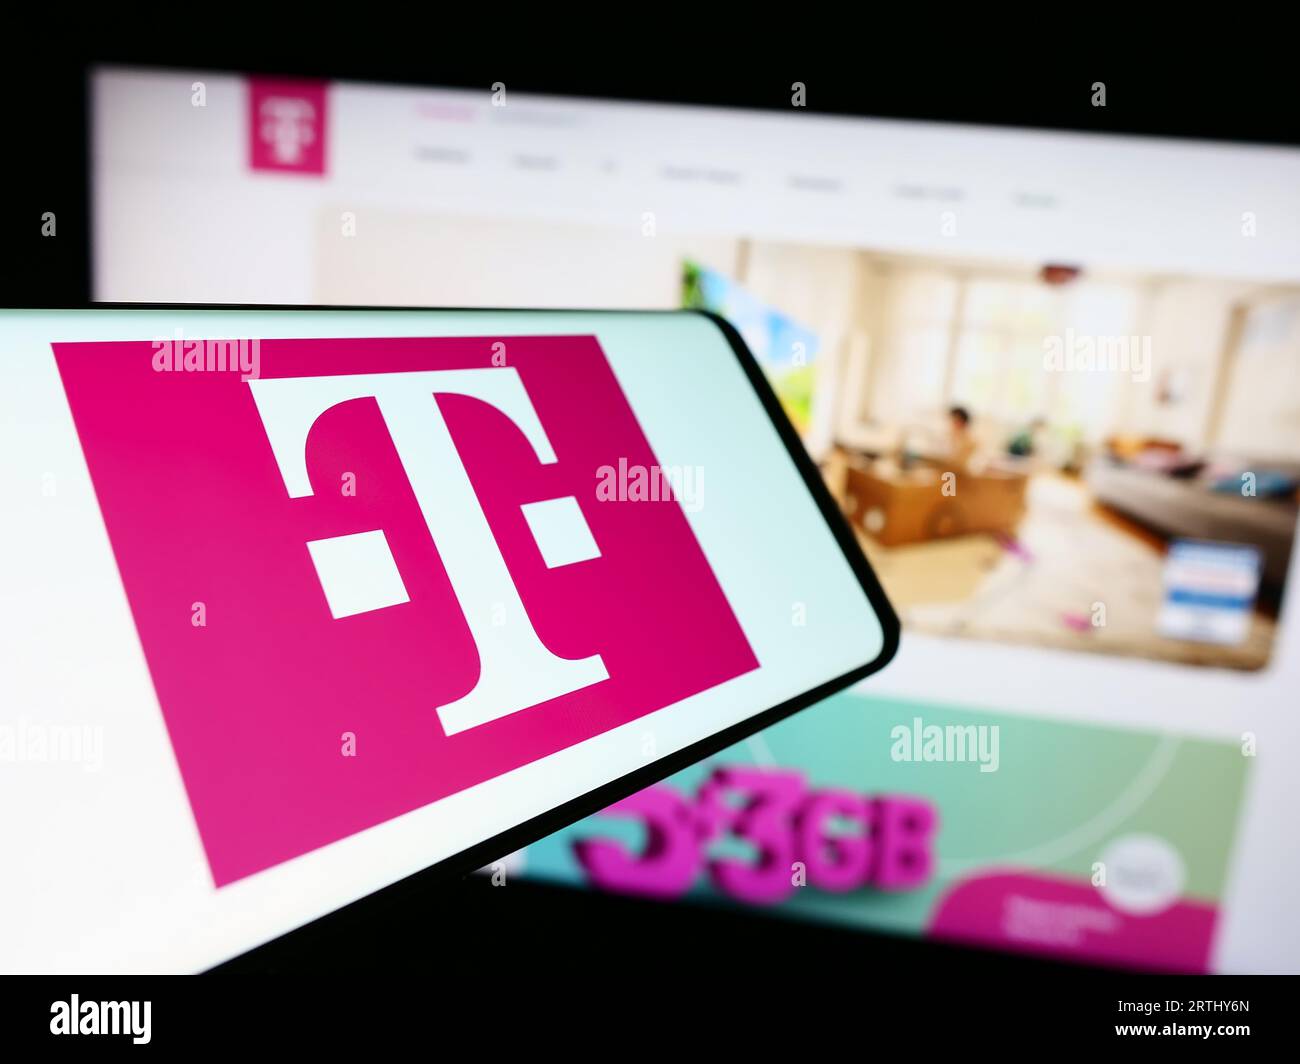 Mobile phone with logo of telecommunications company Deutsche Telekom AG on screen in front of website. Focus on center of phone display. Stock Photo